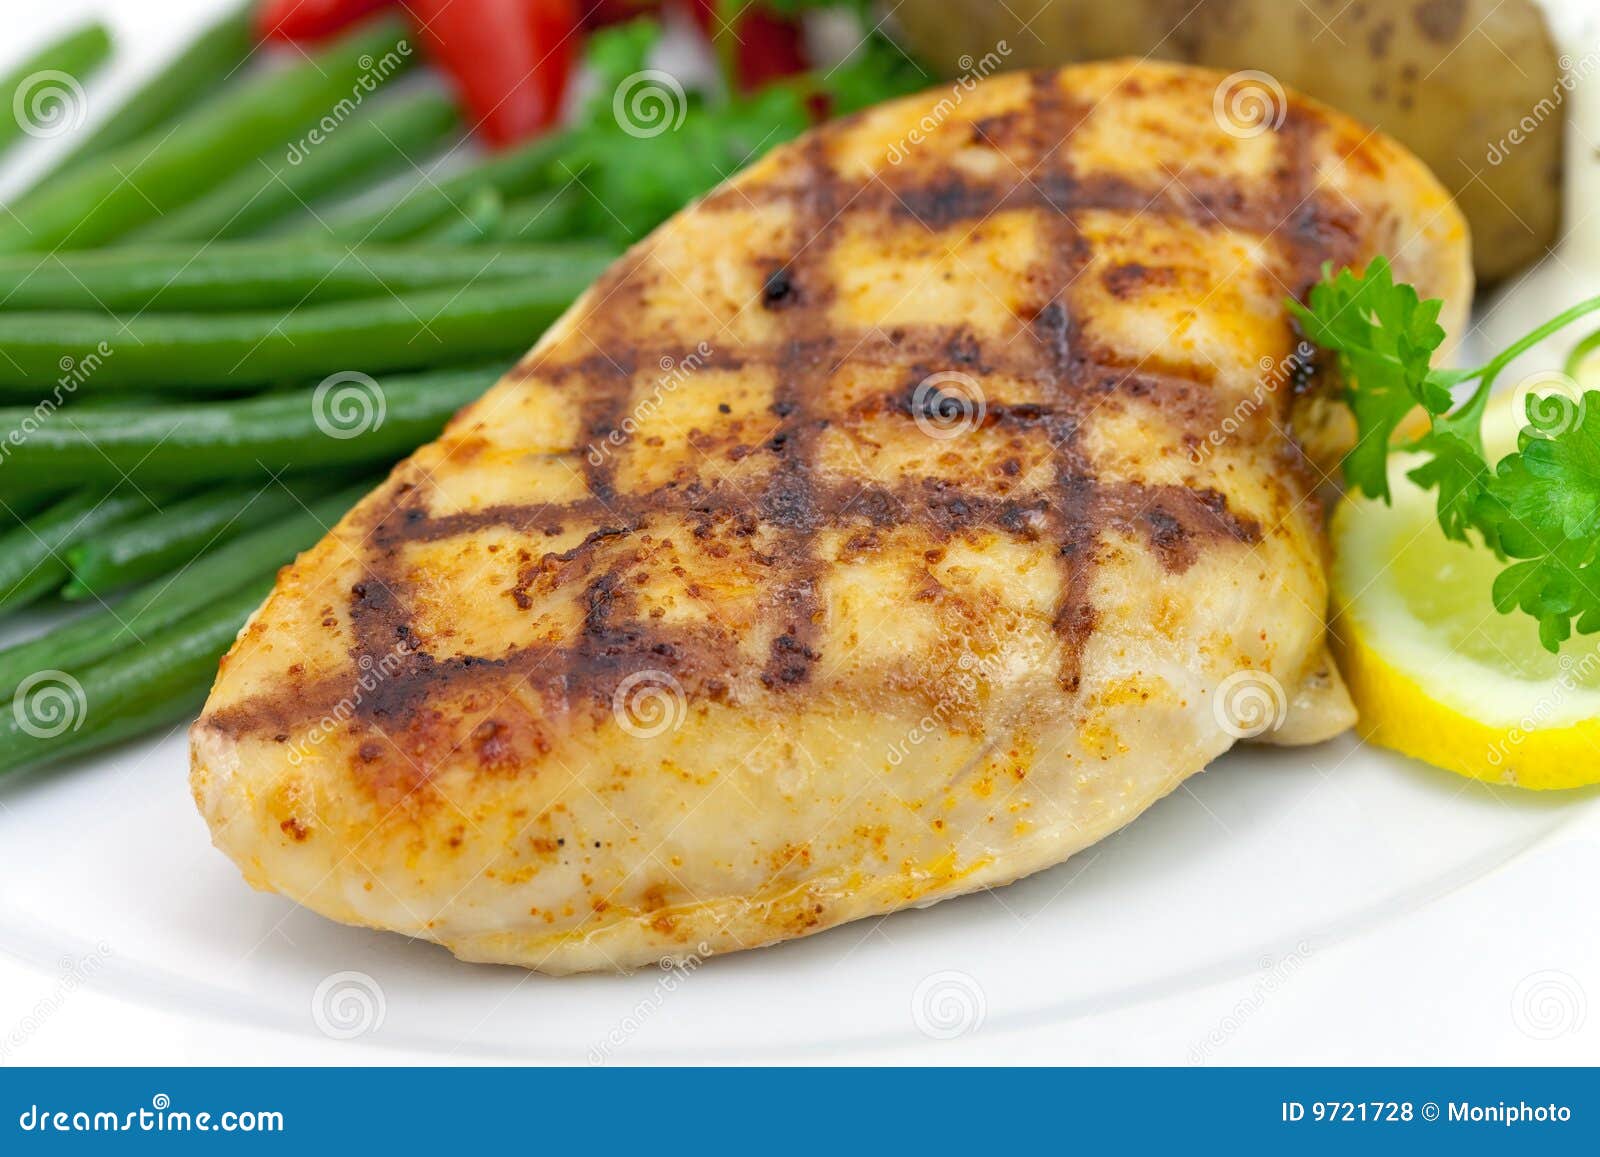 free clipart chicken breasts - photo #43